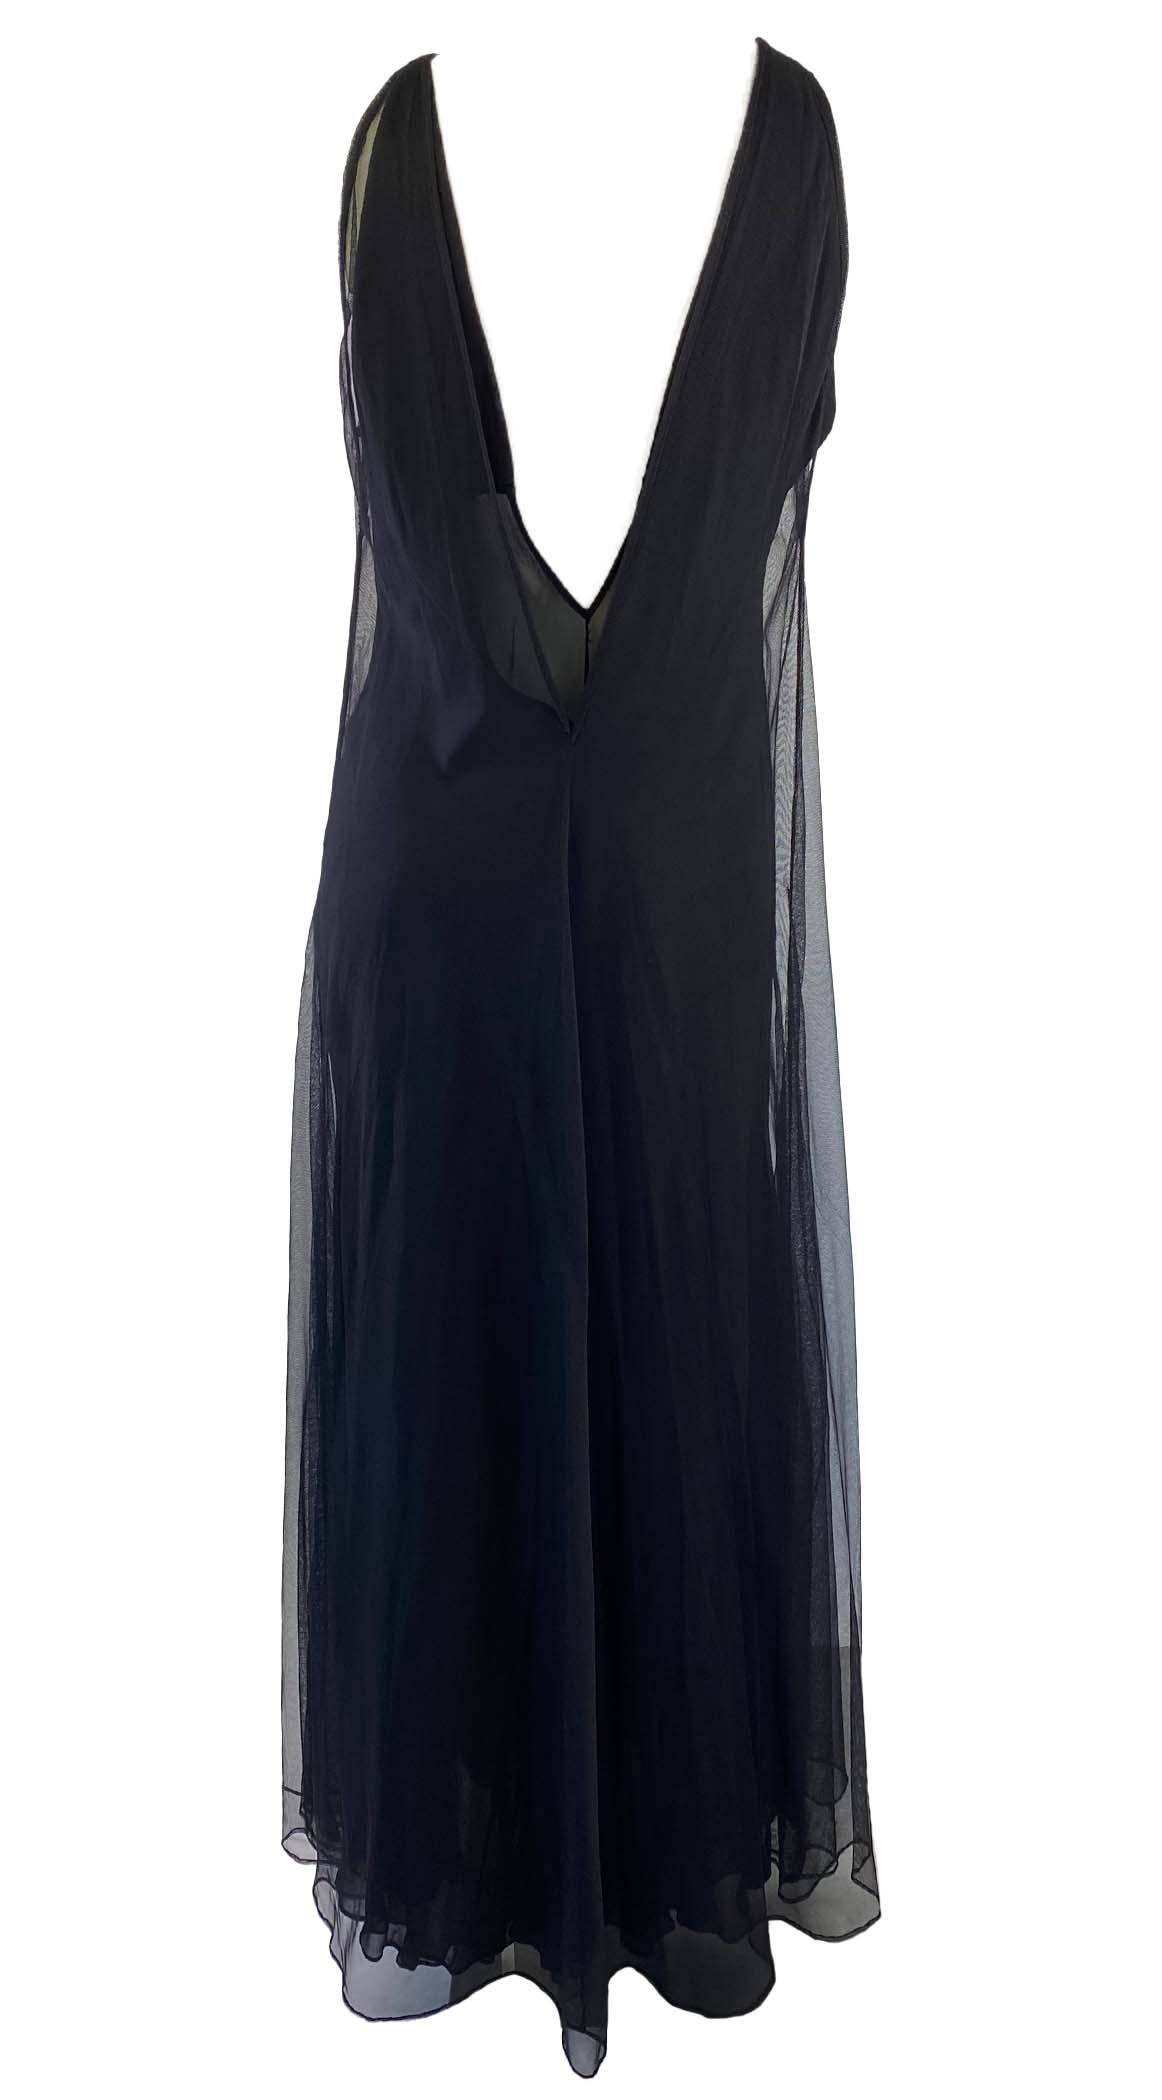 Women's F/W 1998 Gucci by Tom Ford Black Tulle Triple Layer Plunging V-Neck Sheer Gown